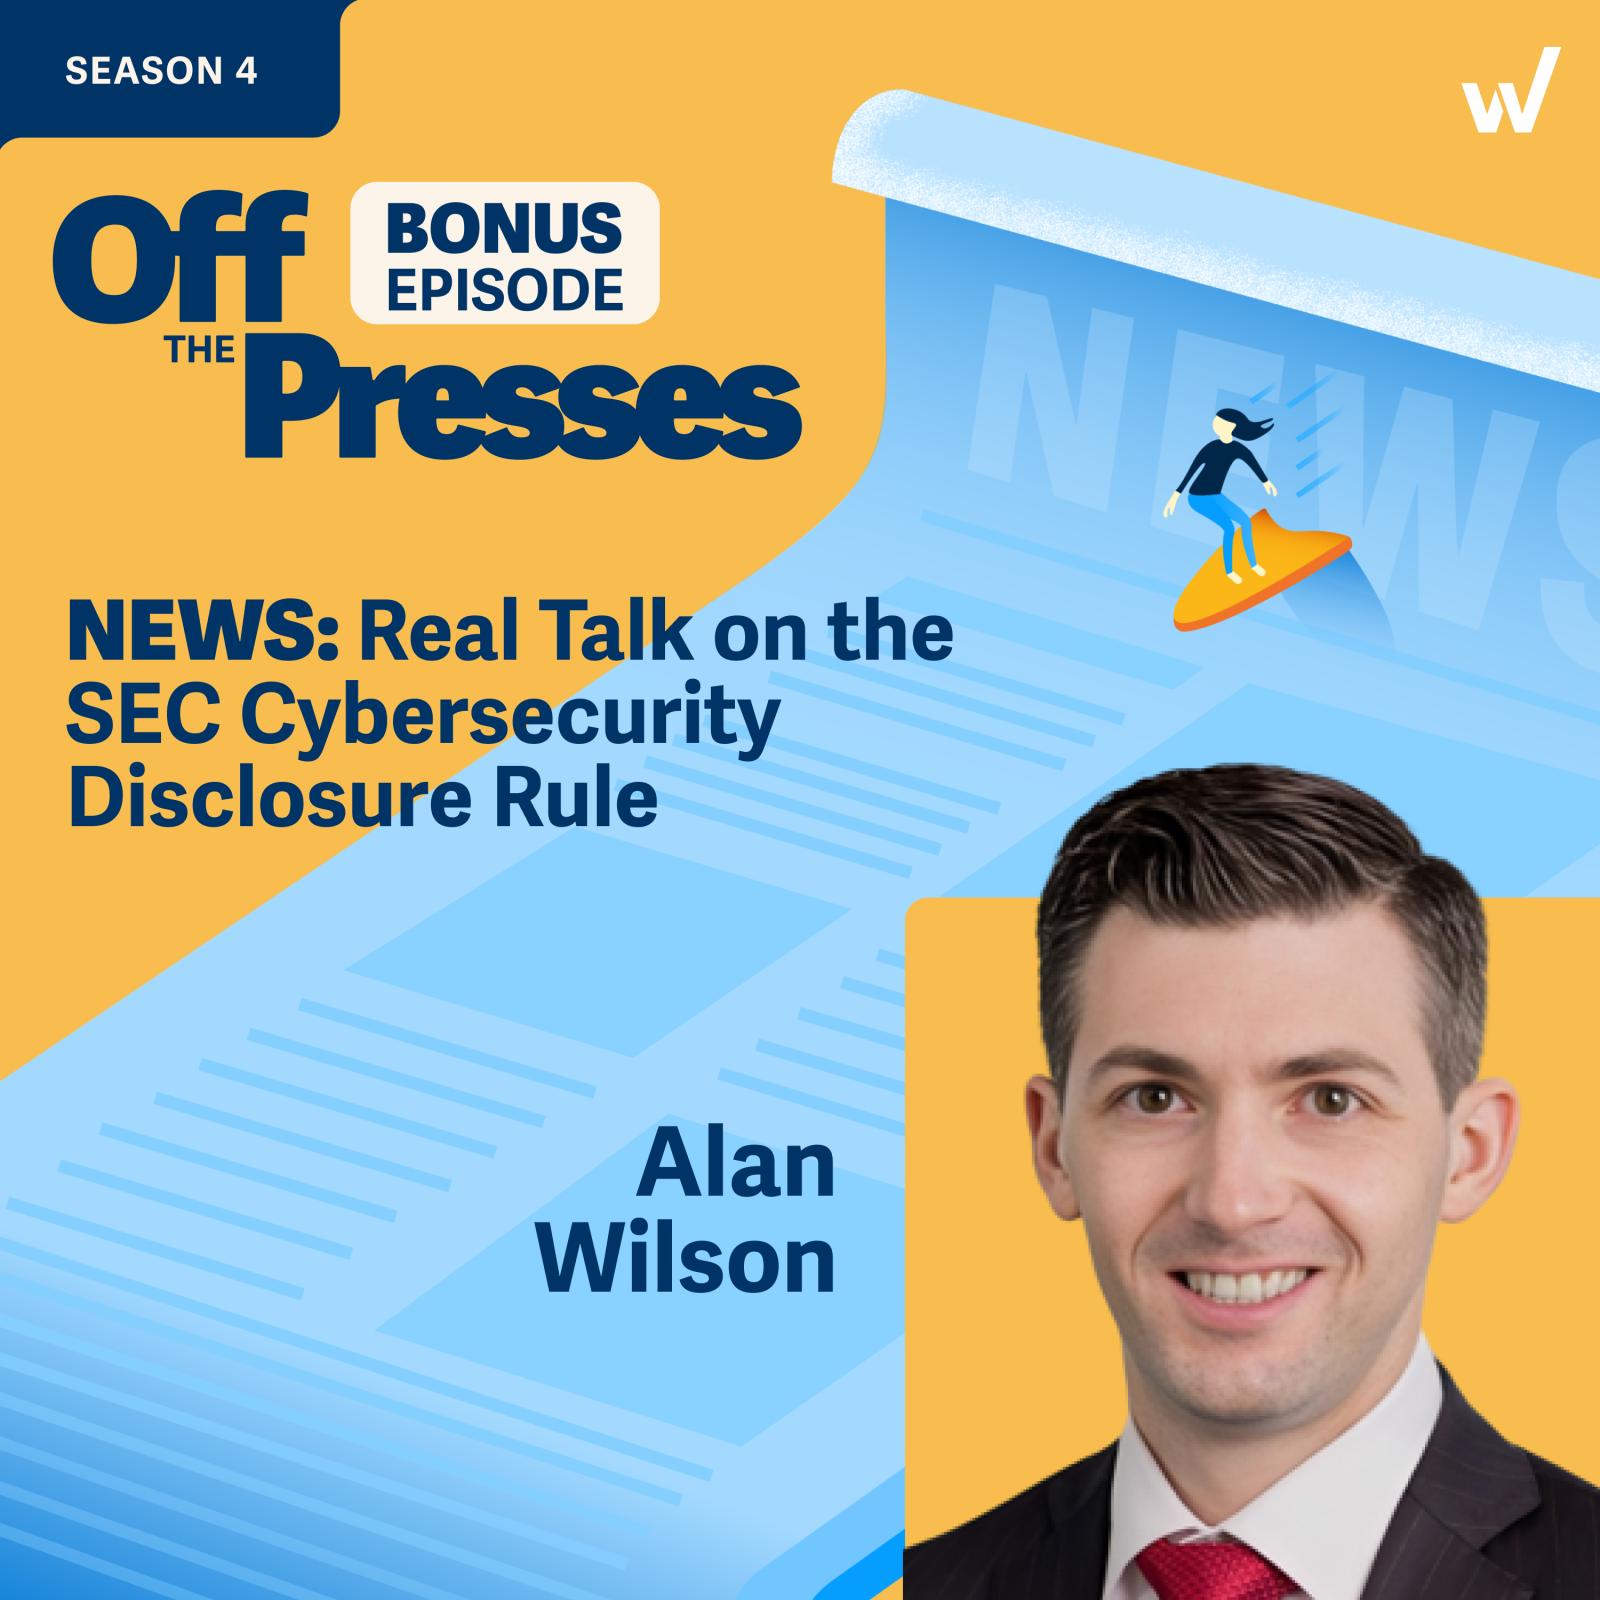 Securities lawyer Alan Wilson on compliance with the SEC cybersecurity rule